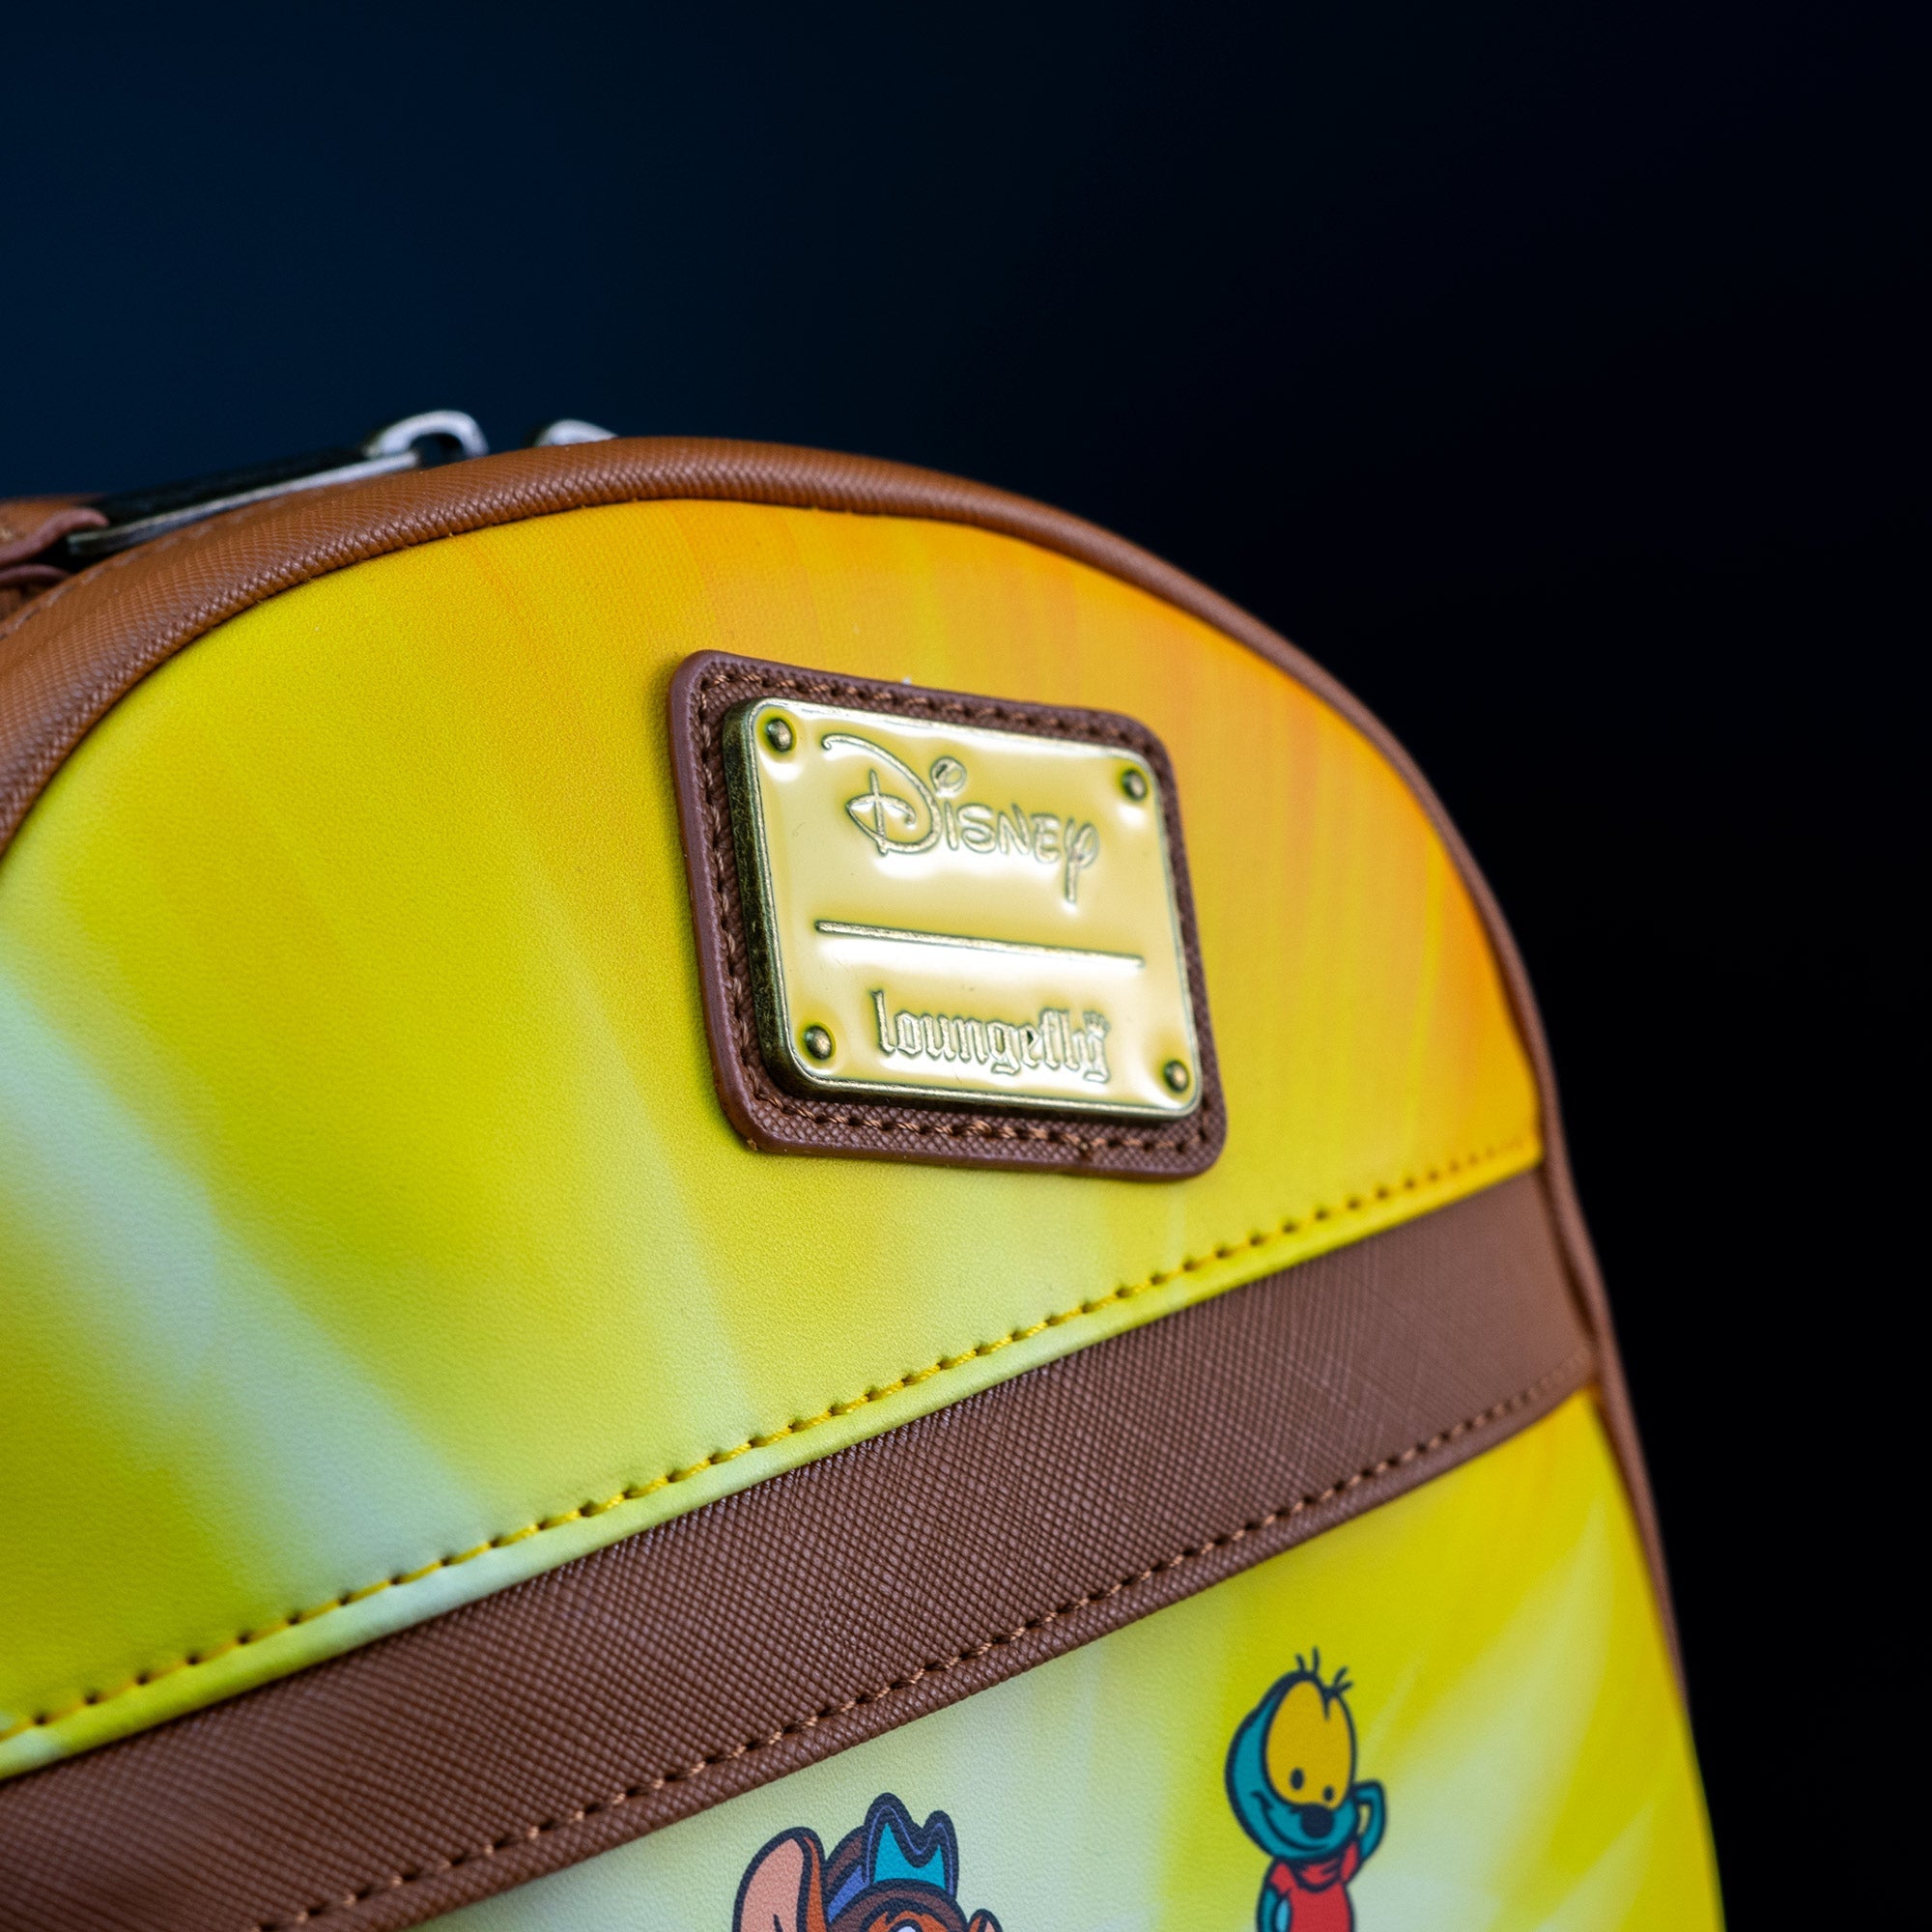 Loungefly x Disney Chip 'n Dale Rescue Rangers Mini Backpack - GeekCore